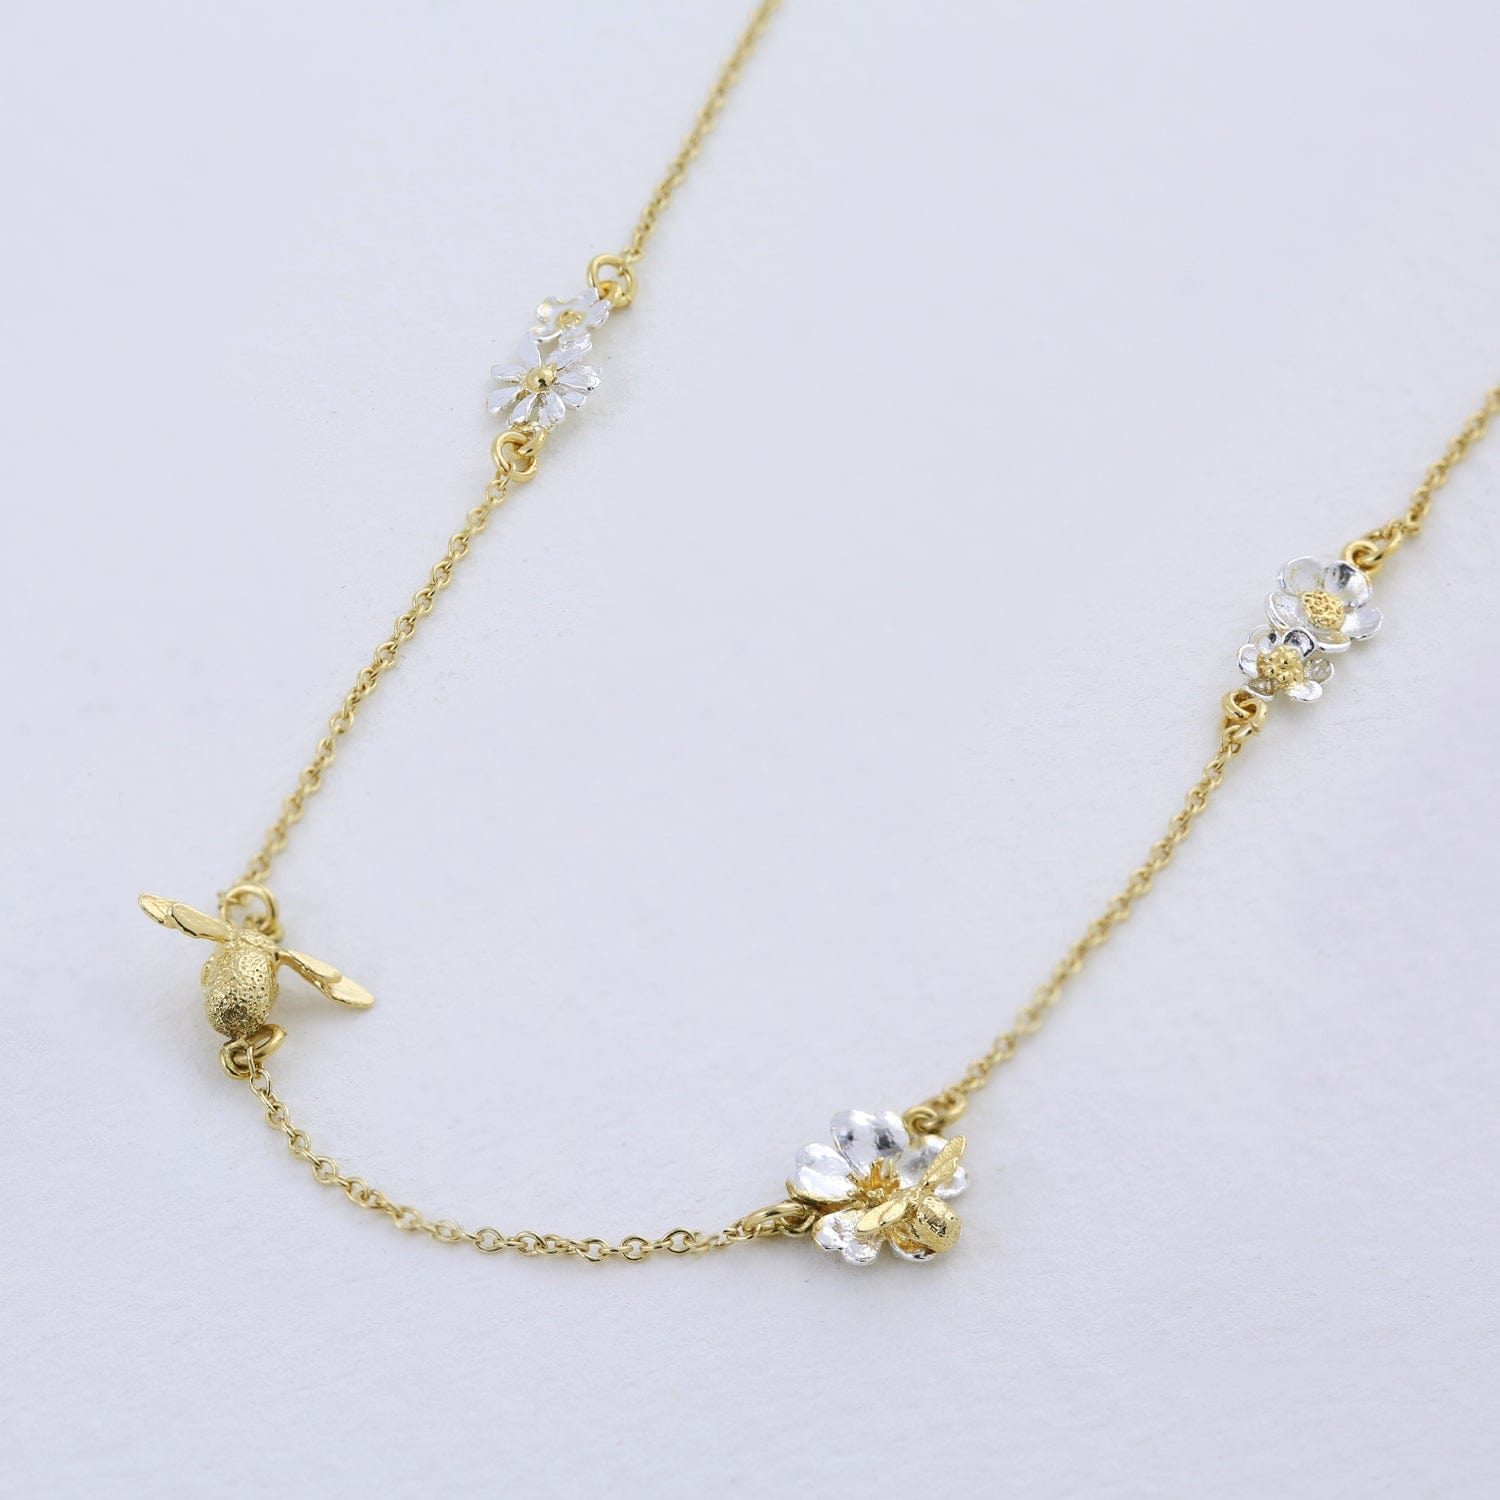 Alex Monroe Floral Chain Necklace with Teeny Tiny Bee